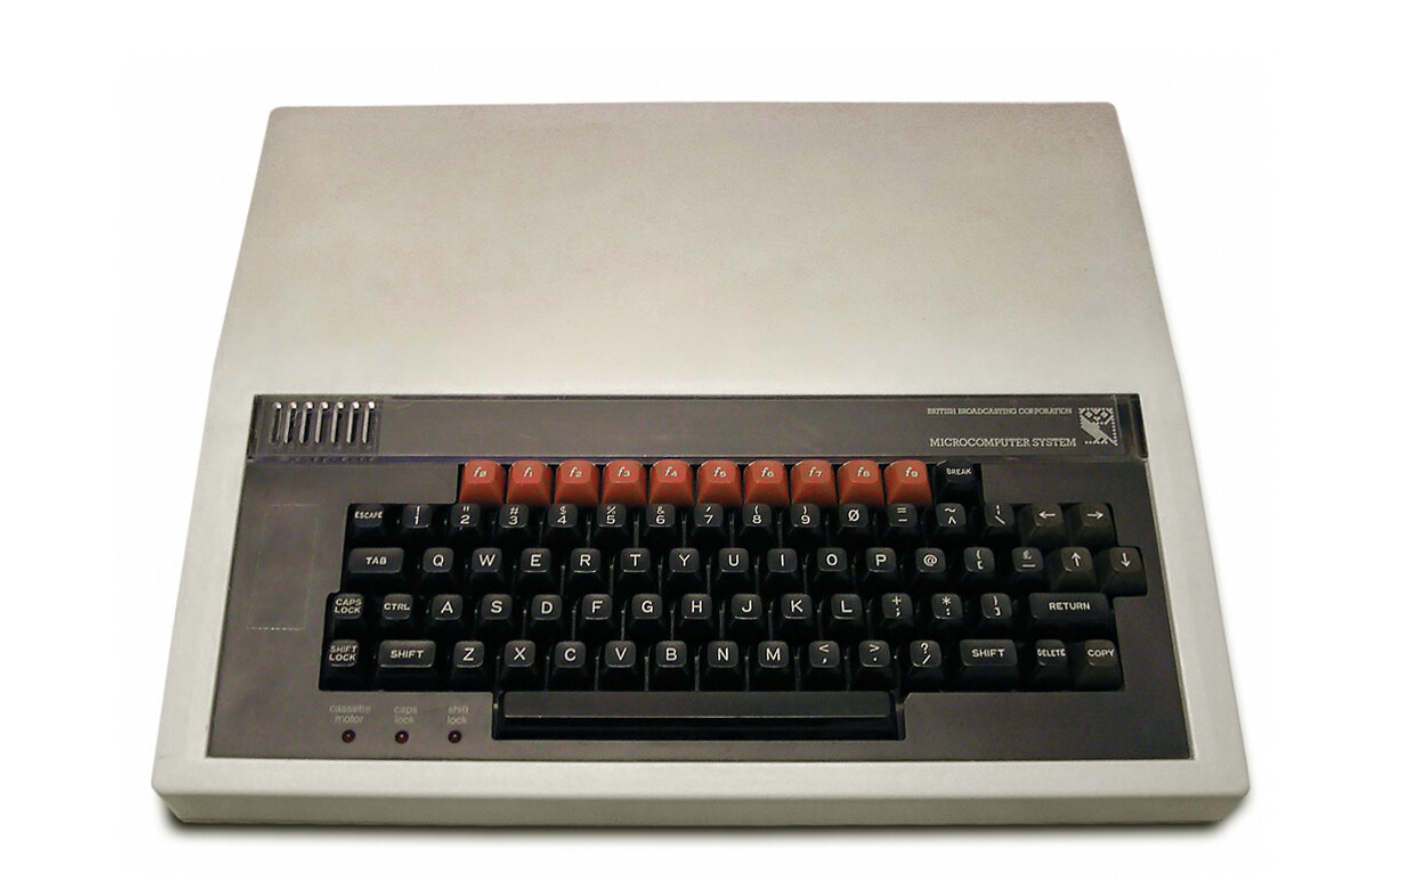 A picture of an IBM Micro